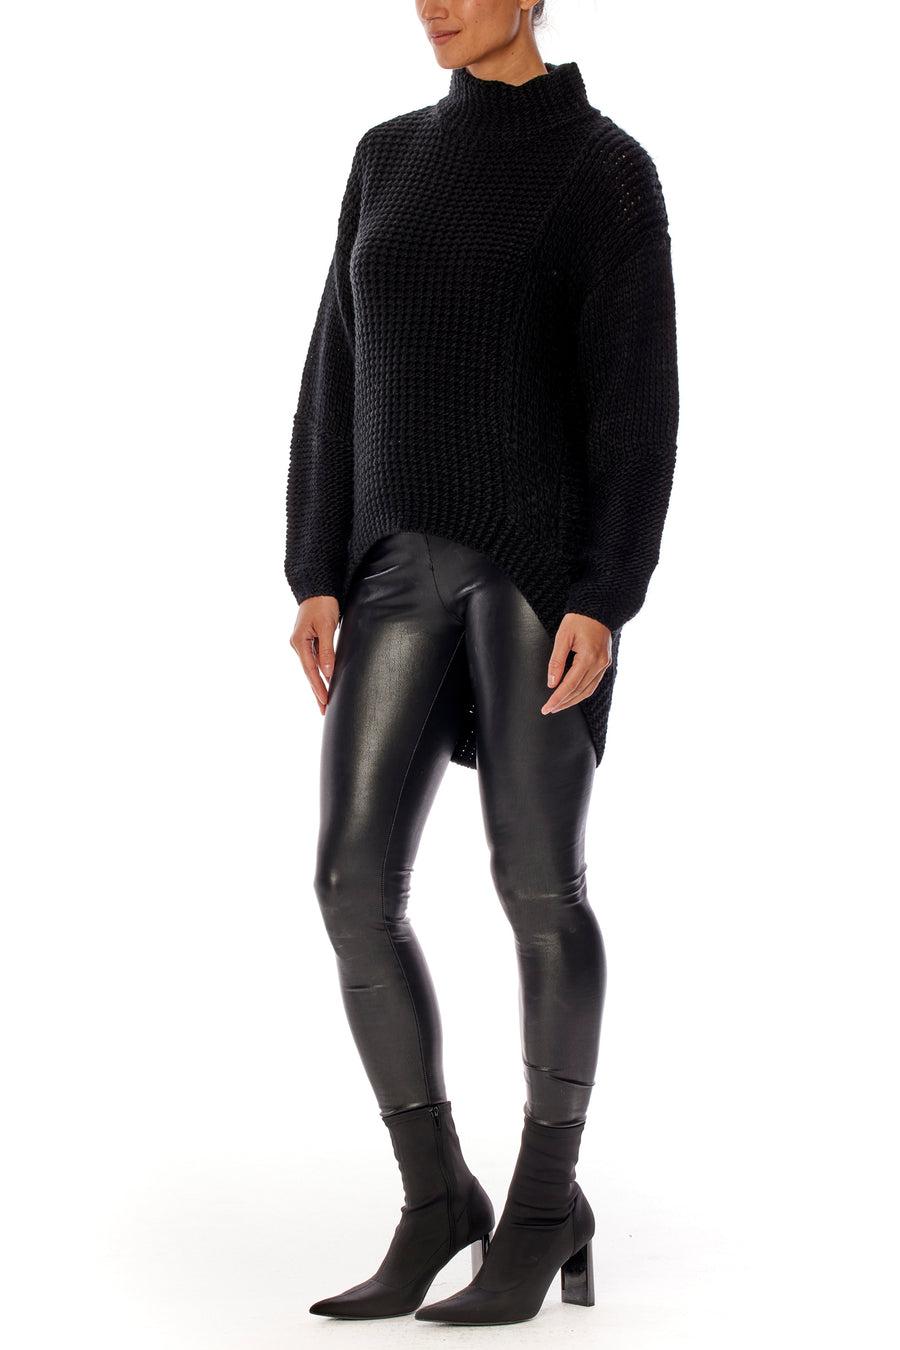 mock neck sweater with long sleeves, high-low hem and multi-knit design detailing in black